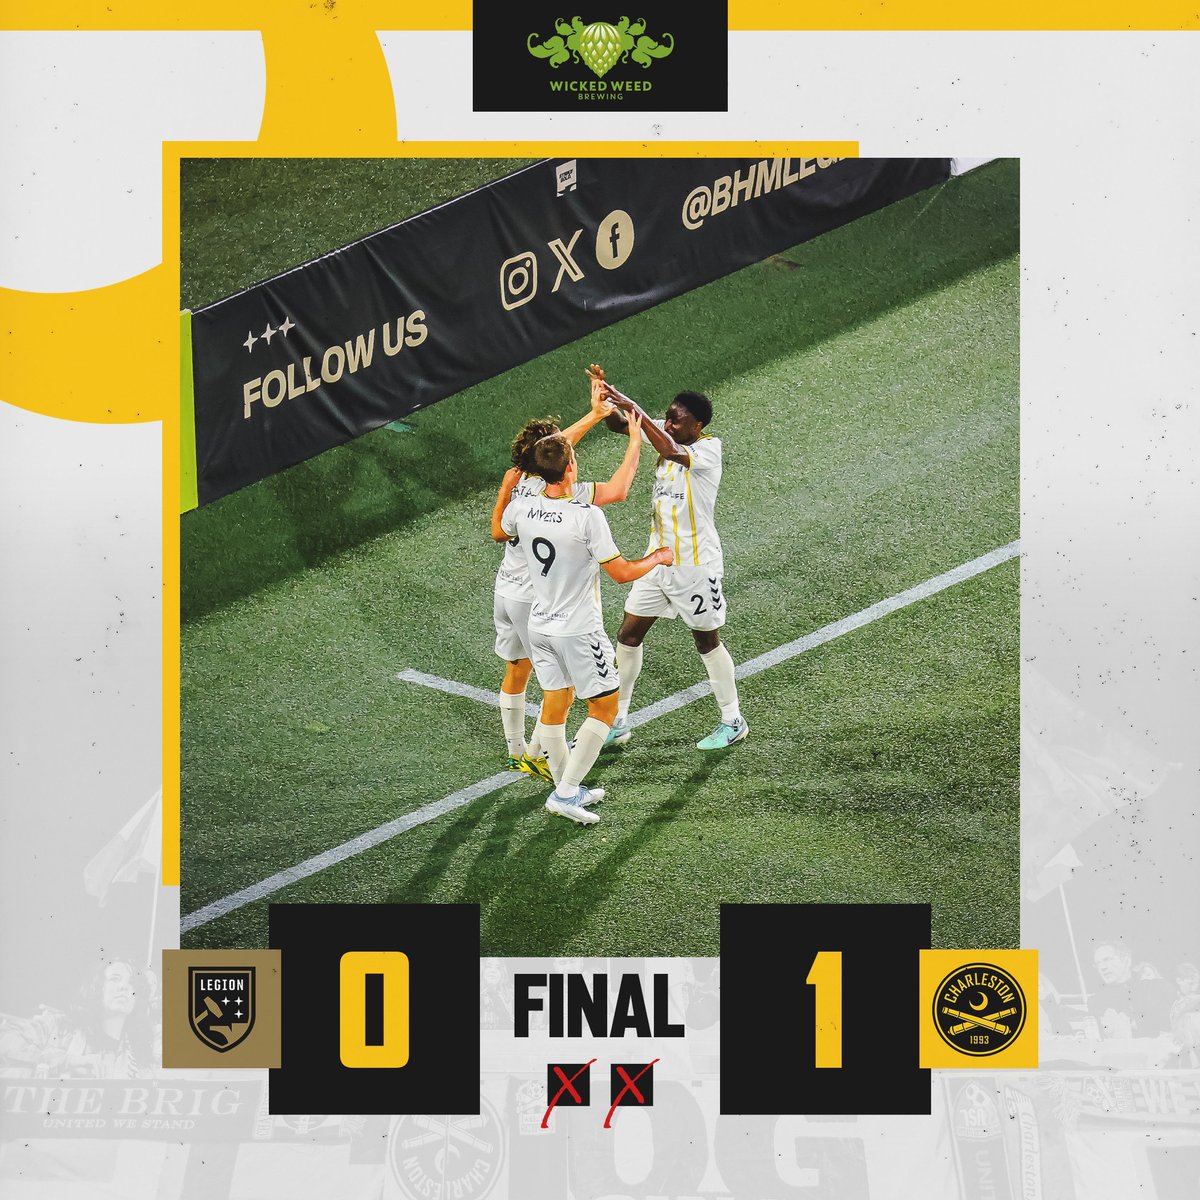 FT ⏱️ | BATTERY WIN! Three points over the three sparks ✅

⚽️ @ycazaemilio 

#BHMvCHS | #CB93 #FortifyAndConquer